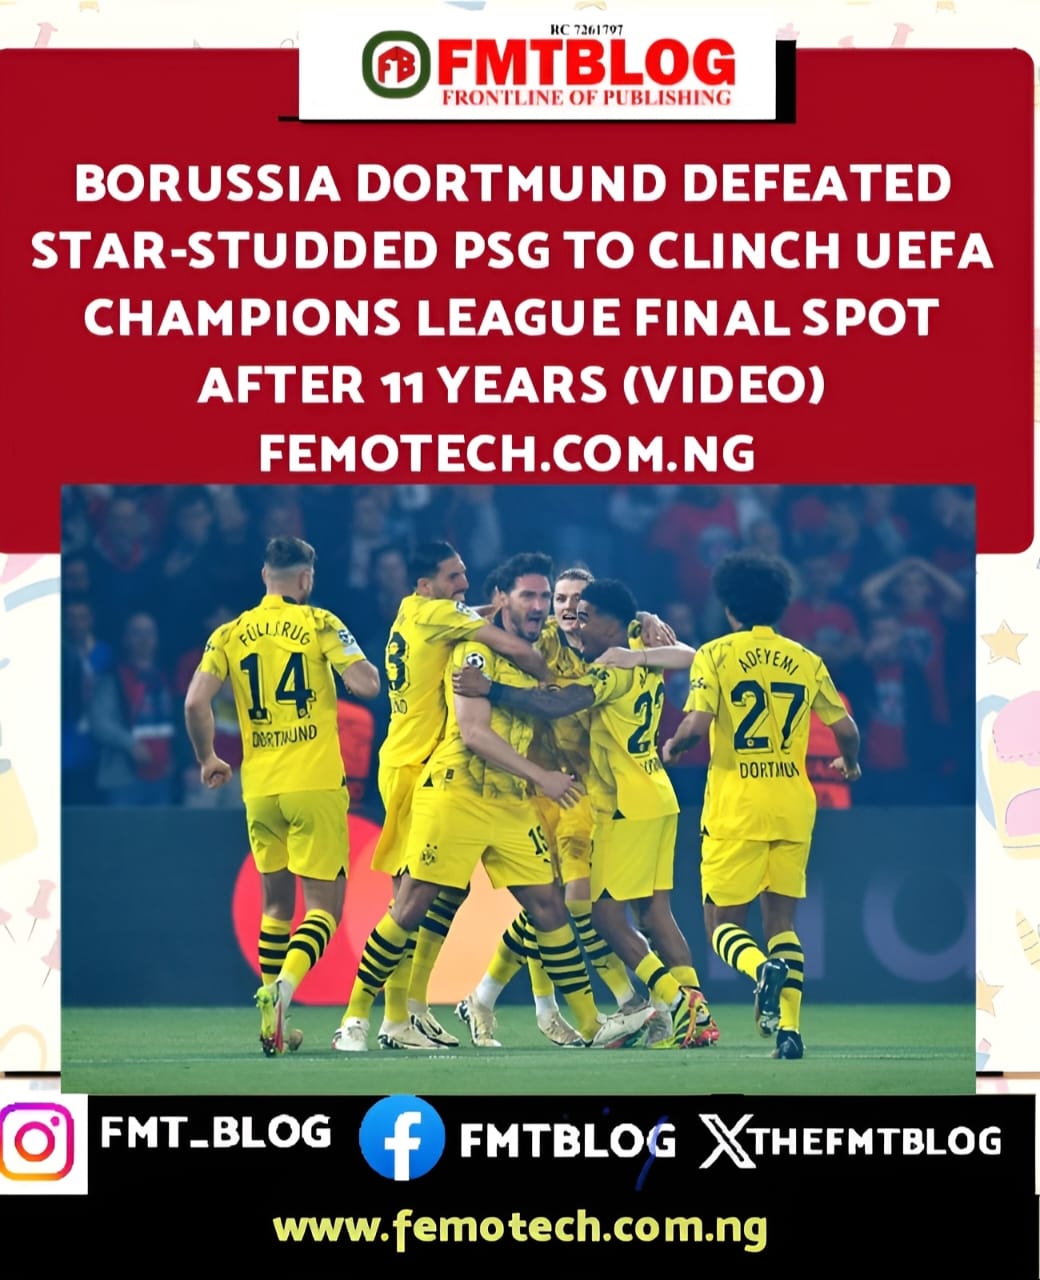 Borussia Dortmund Defeated Star-Studded PSG To Clinch UEFA Champions League Final Spot After 11 Years(VIDEO)